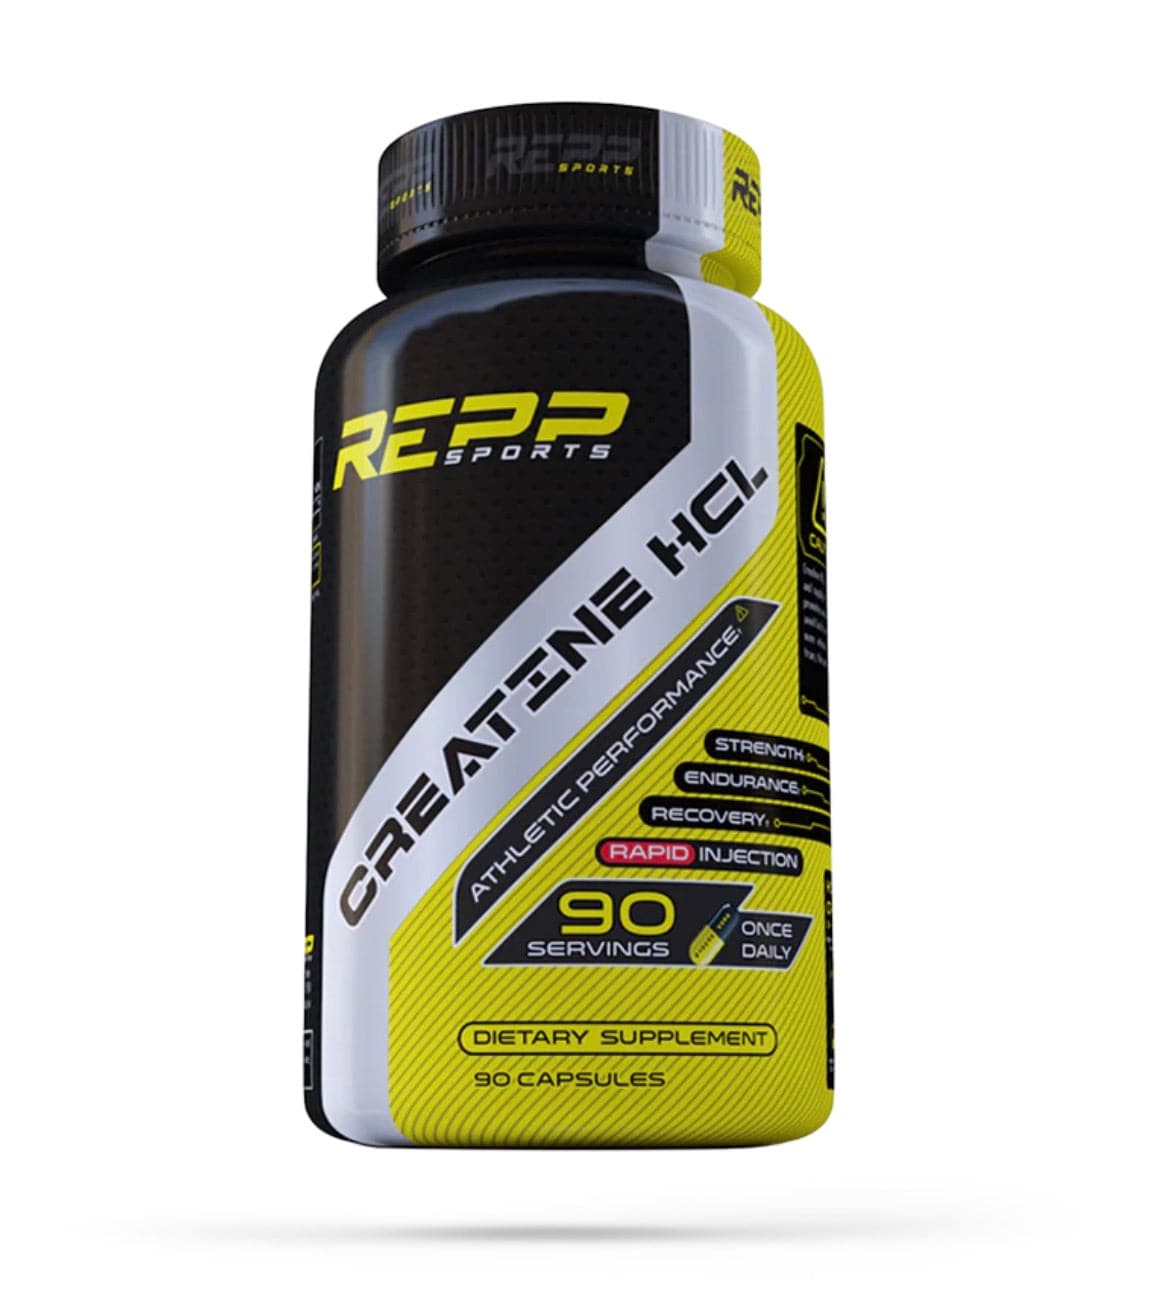 Creatine Hcl - Repp Sports - Prime Sports Nutrition